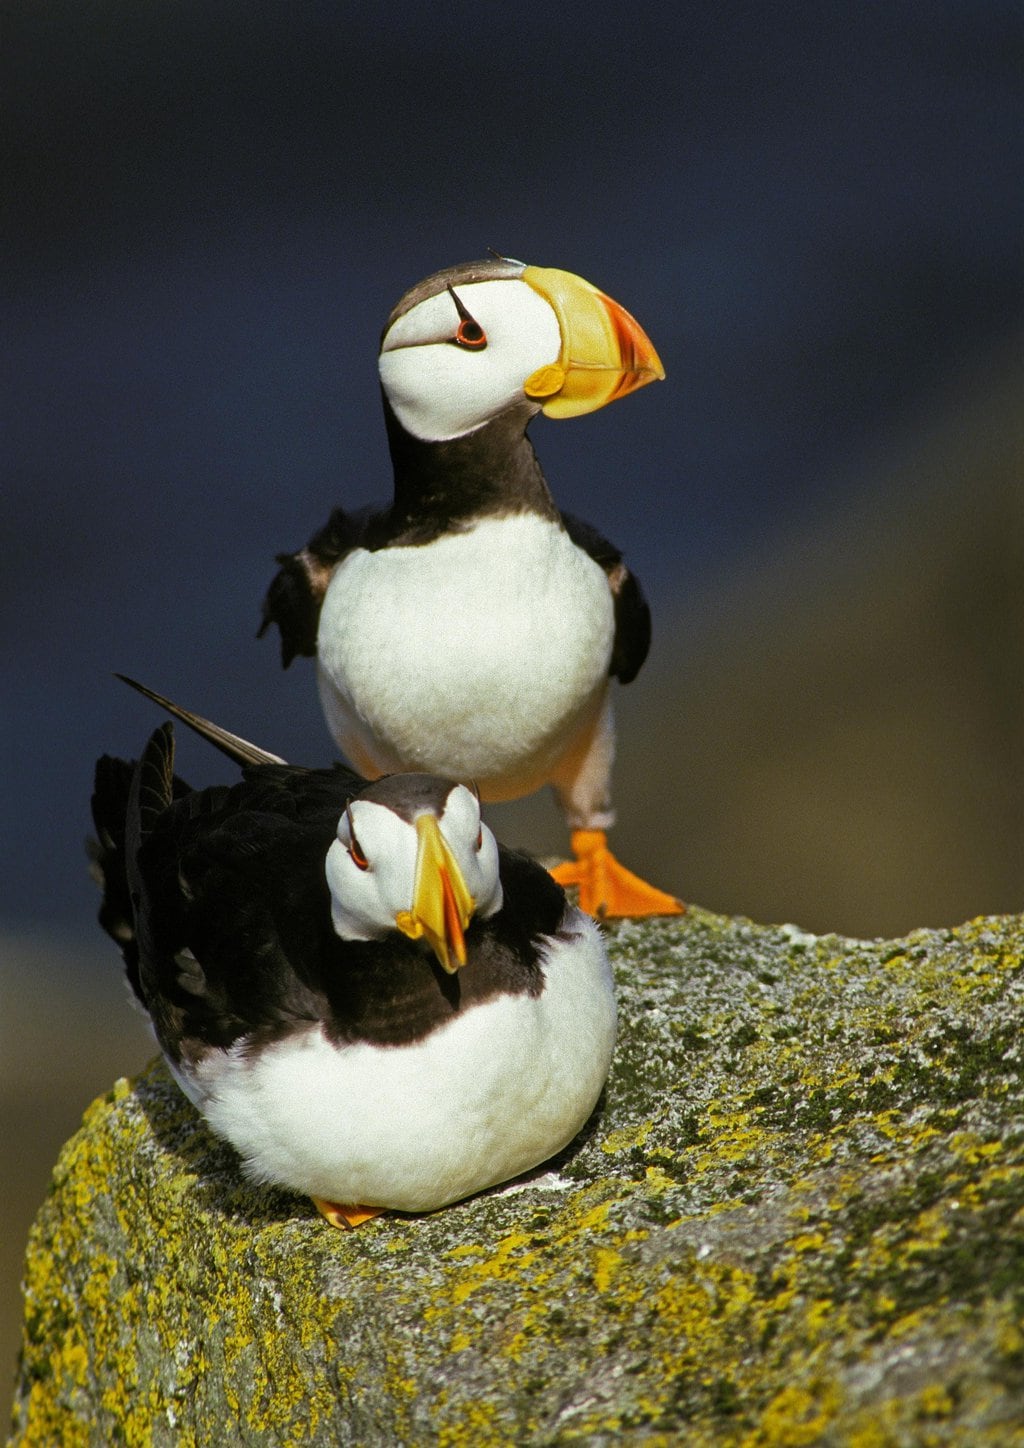 A pair of horned puffins